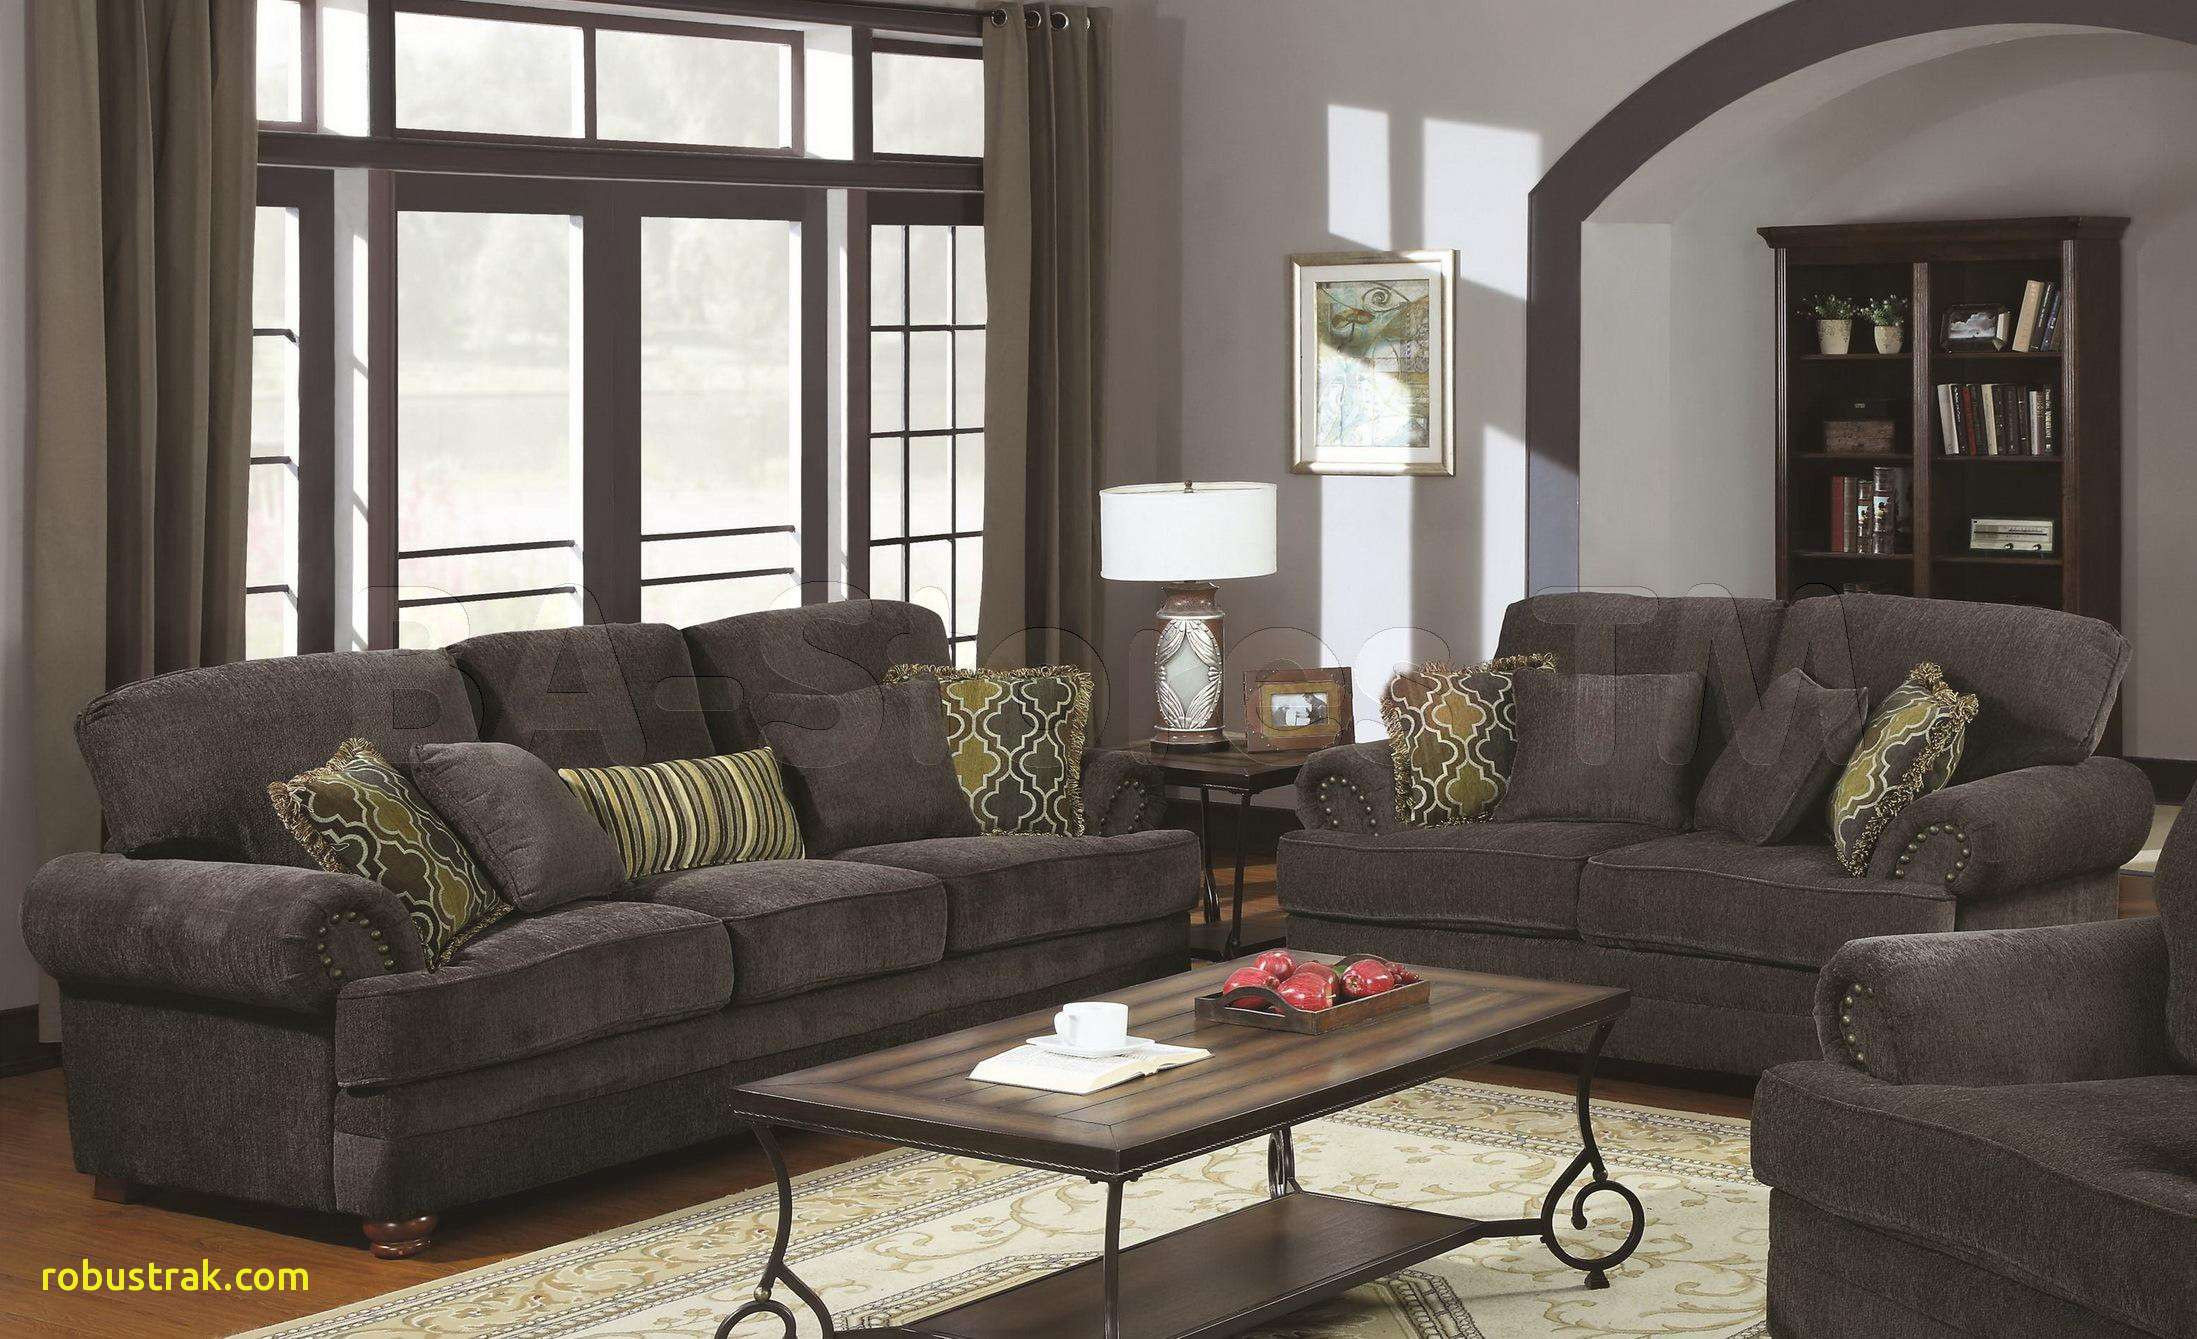 30 Best Couches for Dark Hardwood Floors 2024 free download couches for dark hardwood floors of beautiful black and grey living room home design ideas with black sofas living room design awesome furniture dark grey couch inspirational wicker outdoor 